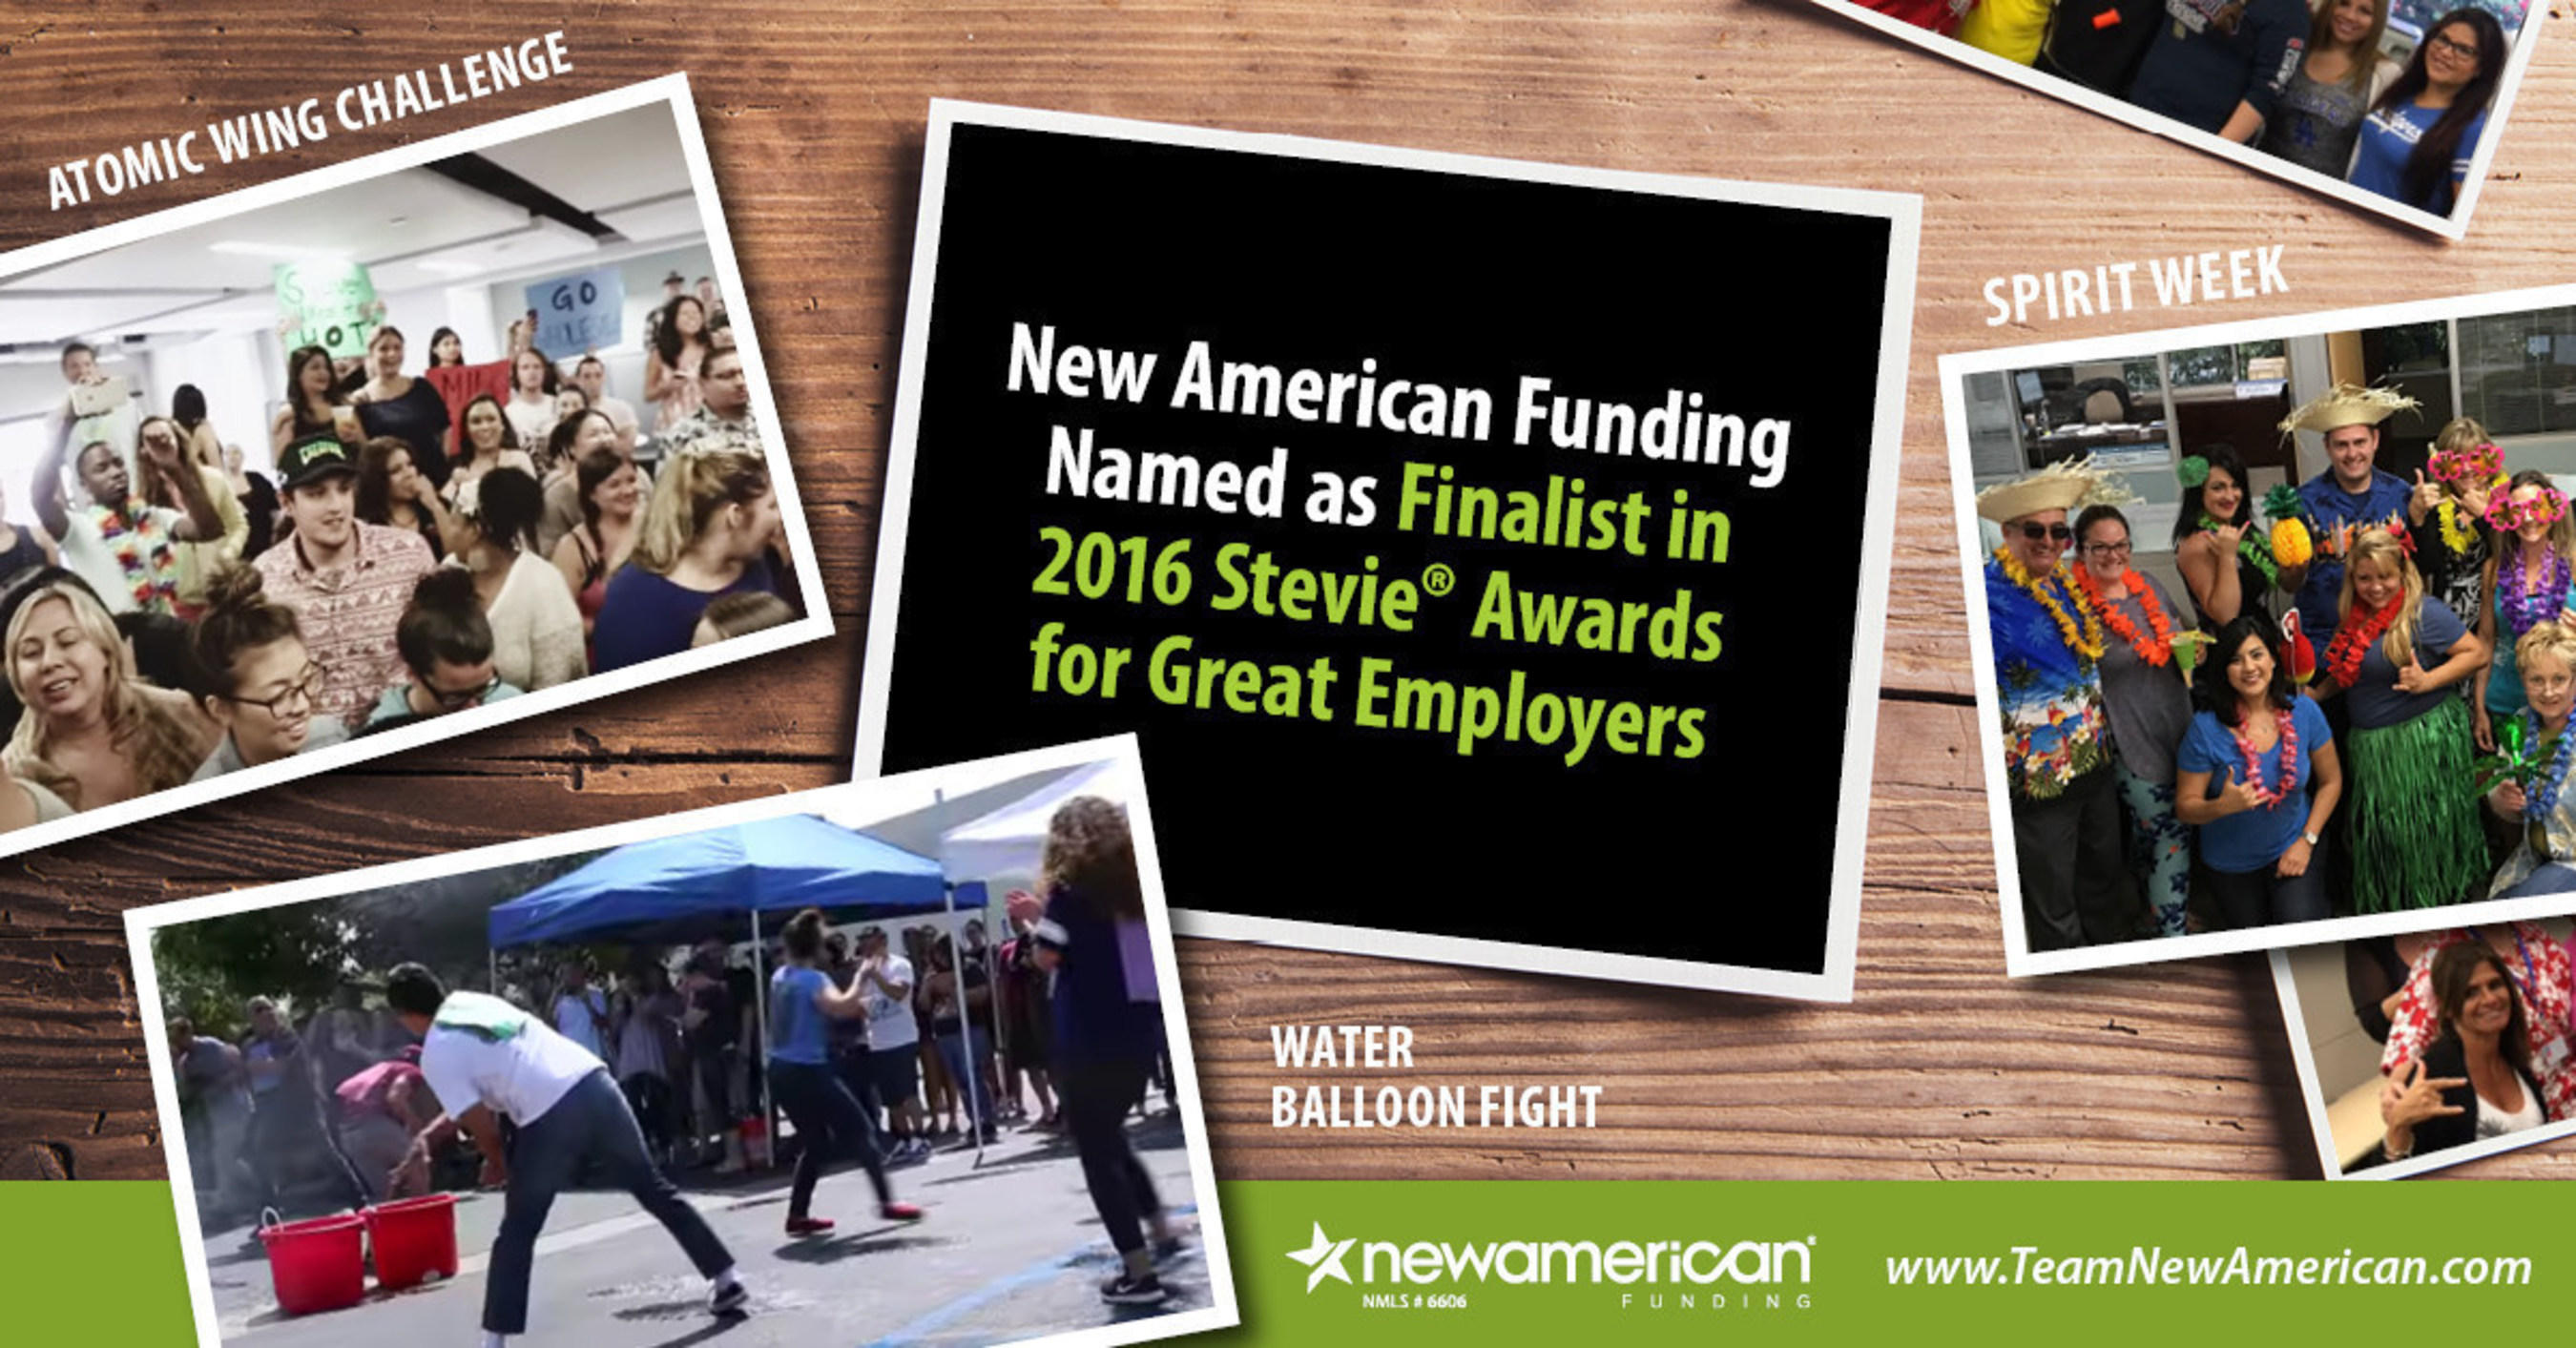 New American Funding Named as Finalist in 2016 Stevie Awards for Great Employers.